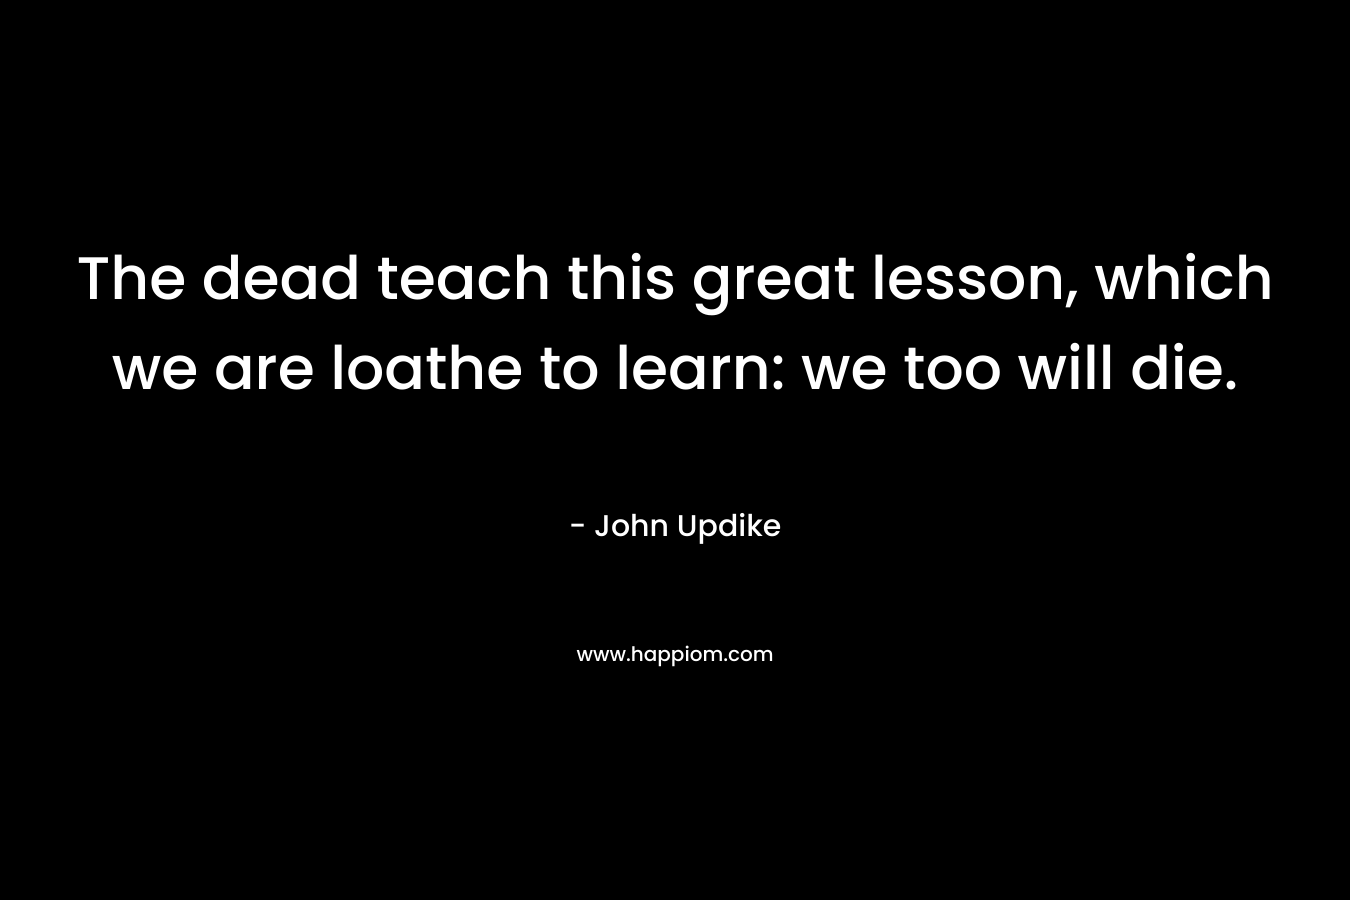 The dead teach this great lesson, which we are loathe to learn: we too will die. – John Updike